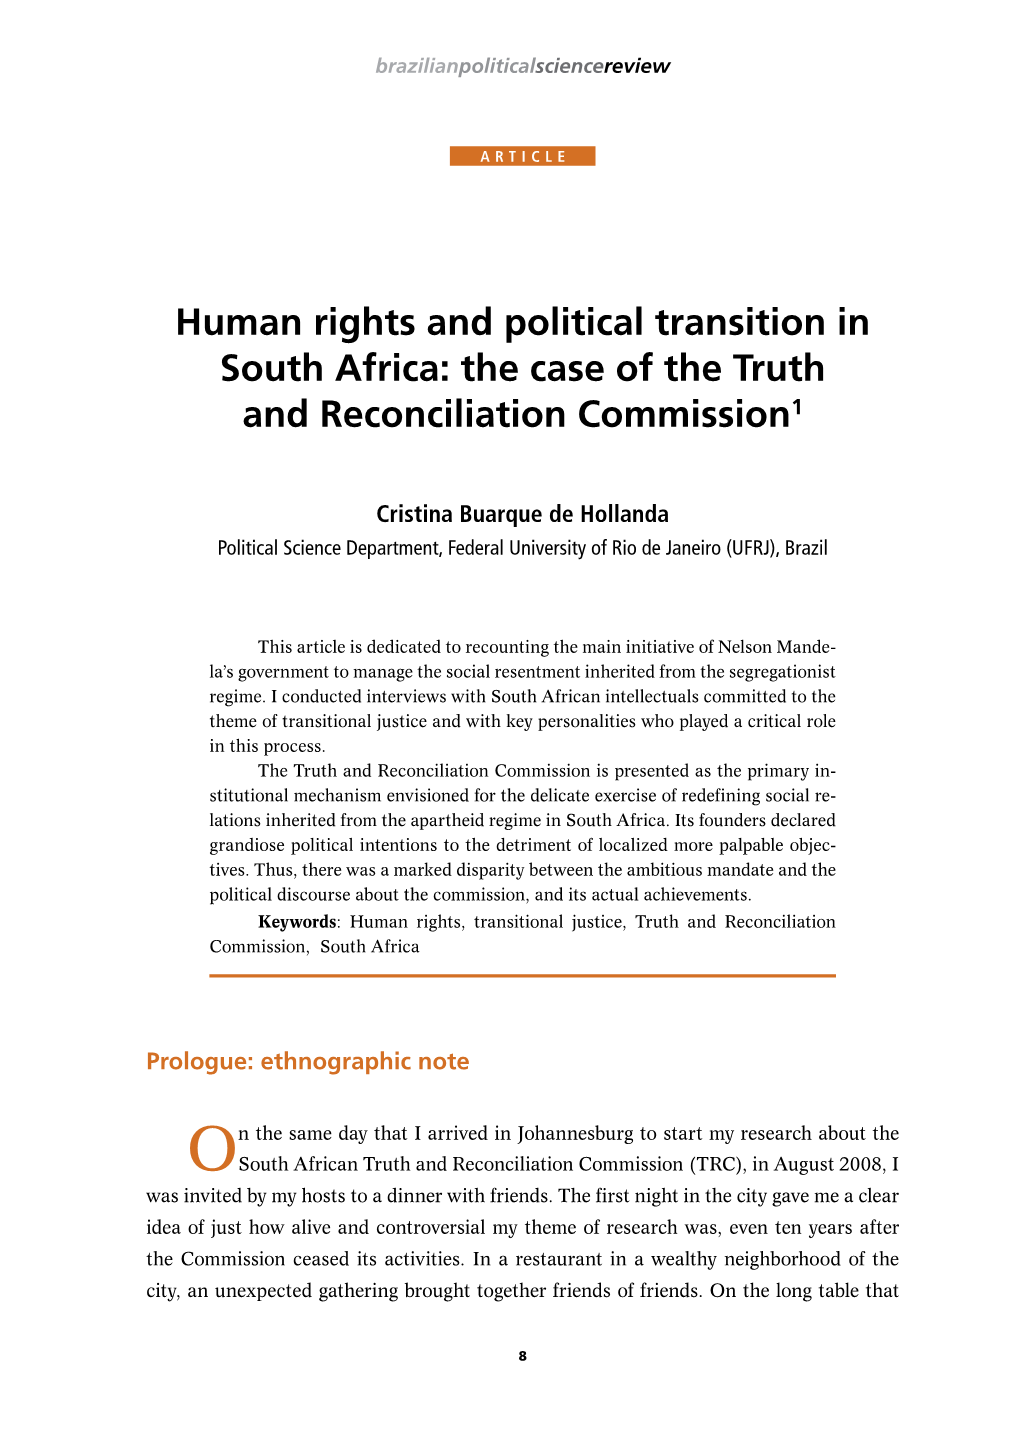 Human Rights and Political Transition in South Africa: the Case of the Truth and Reconciliation Commission1